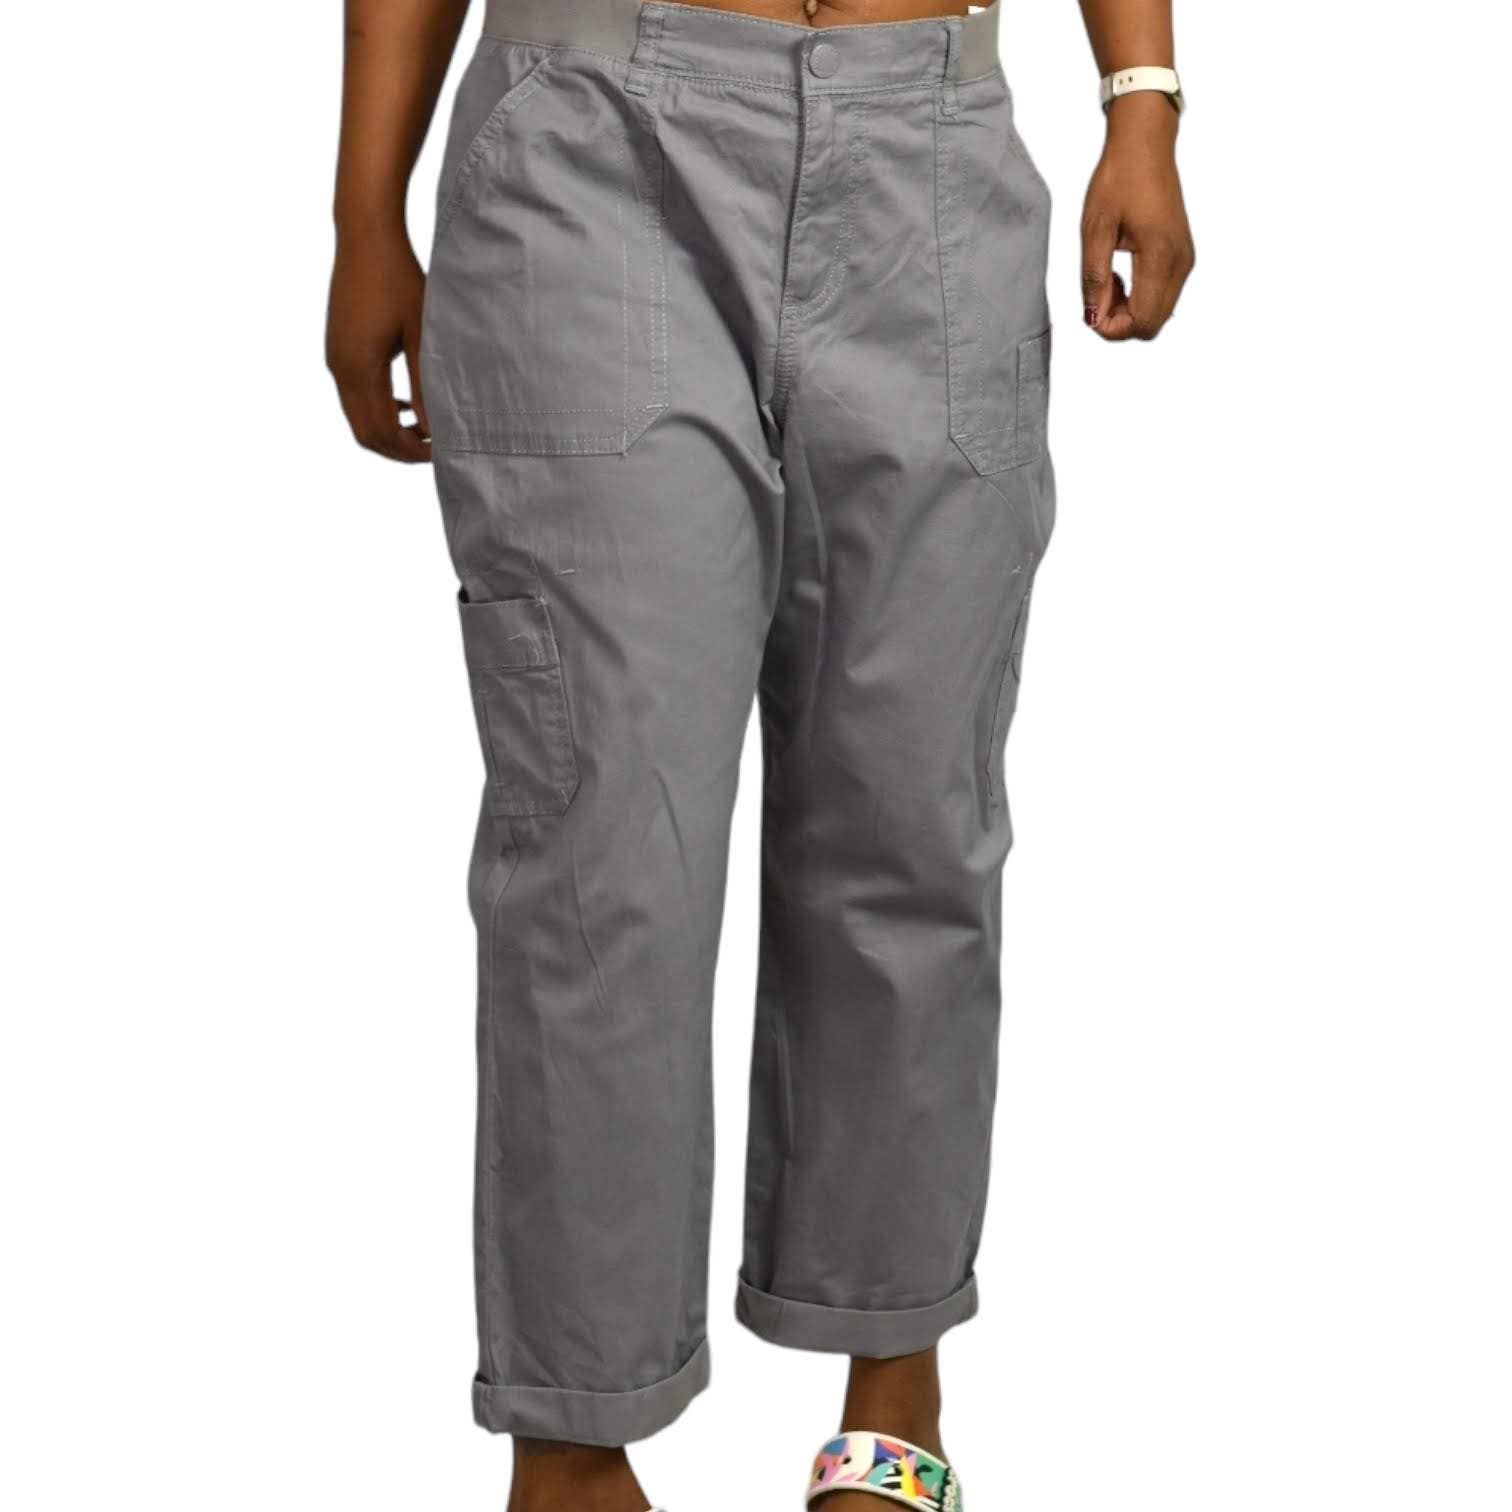 Lee Cargo Pants Relaxed Fit Cropped Cuffed Grey Straight Capri Mid Rise Size 12